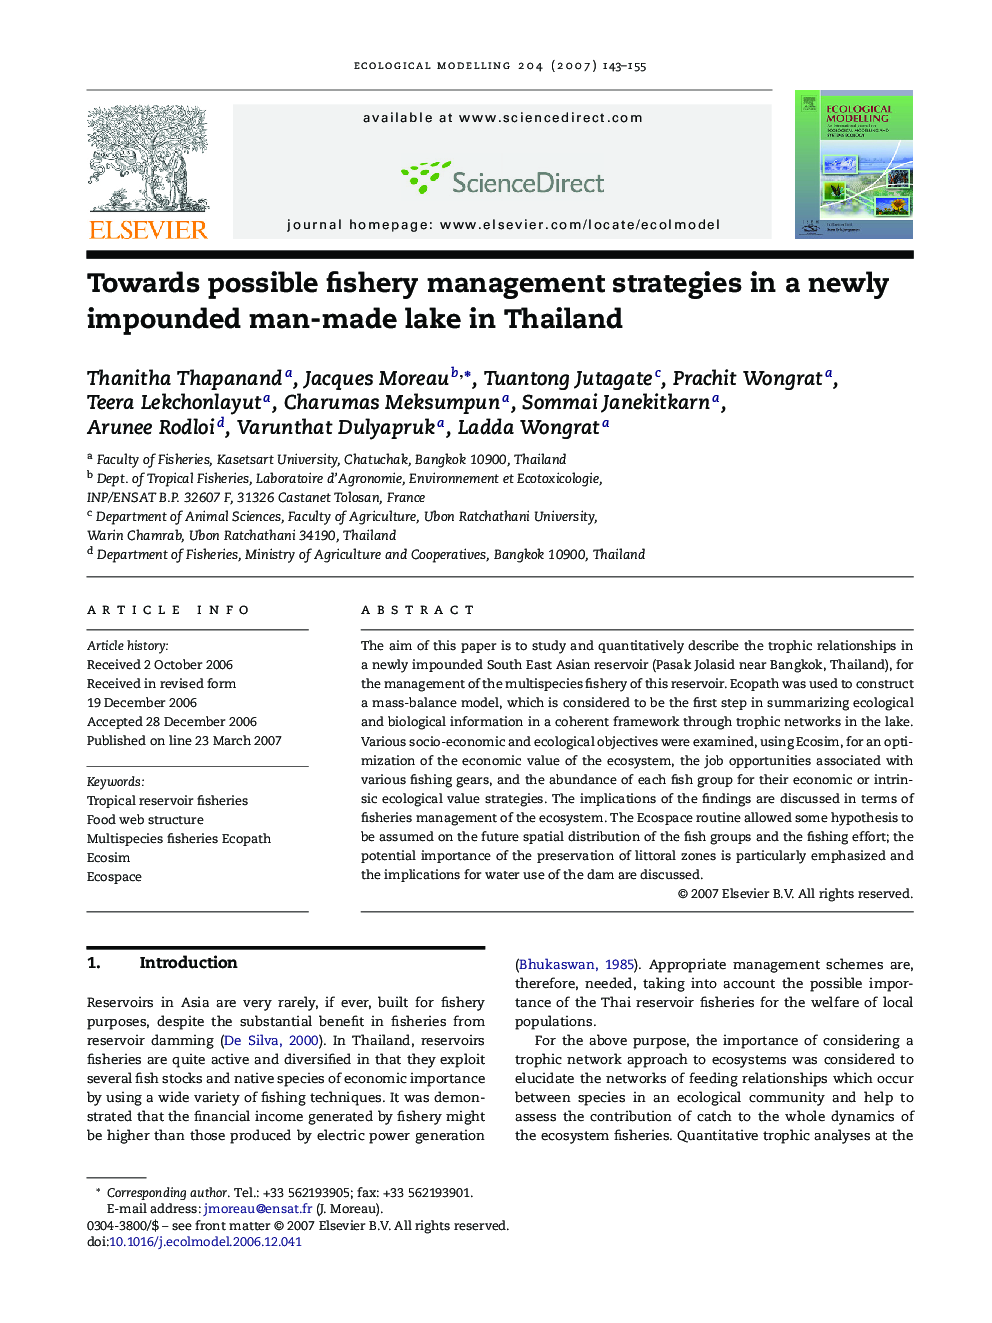 Towards possible fishery management strategies in a newly impounded man-made lake in Thailand